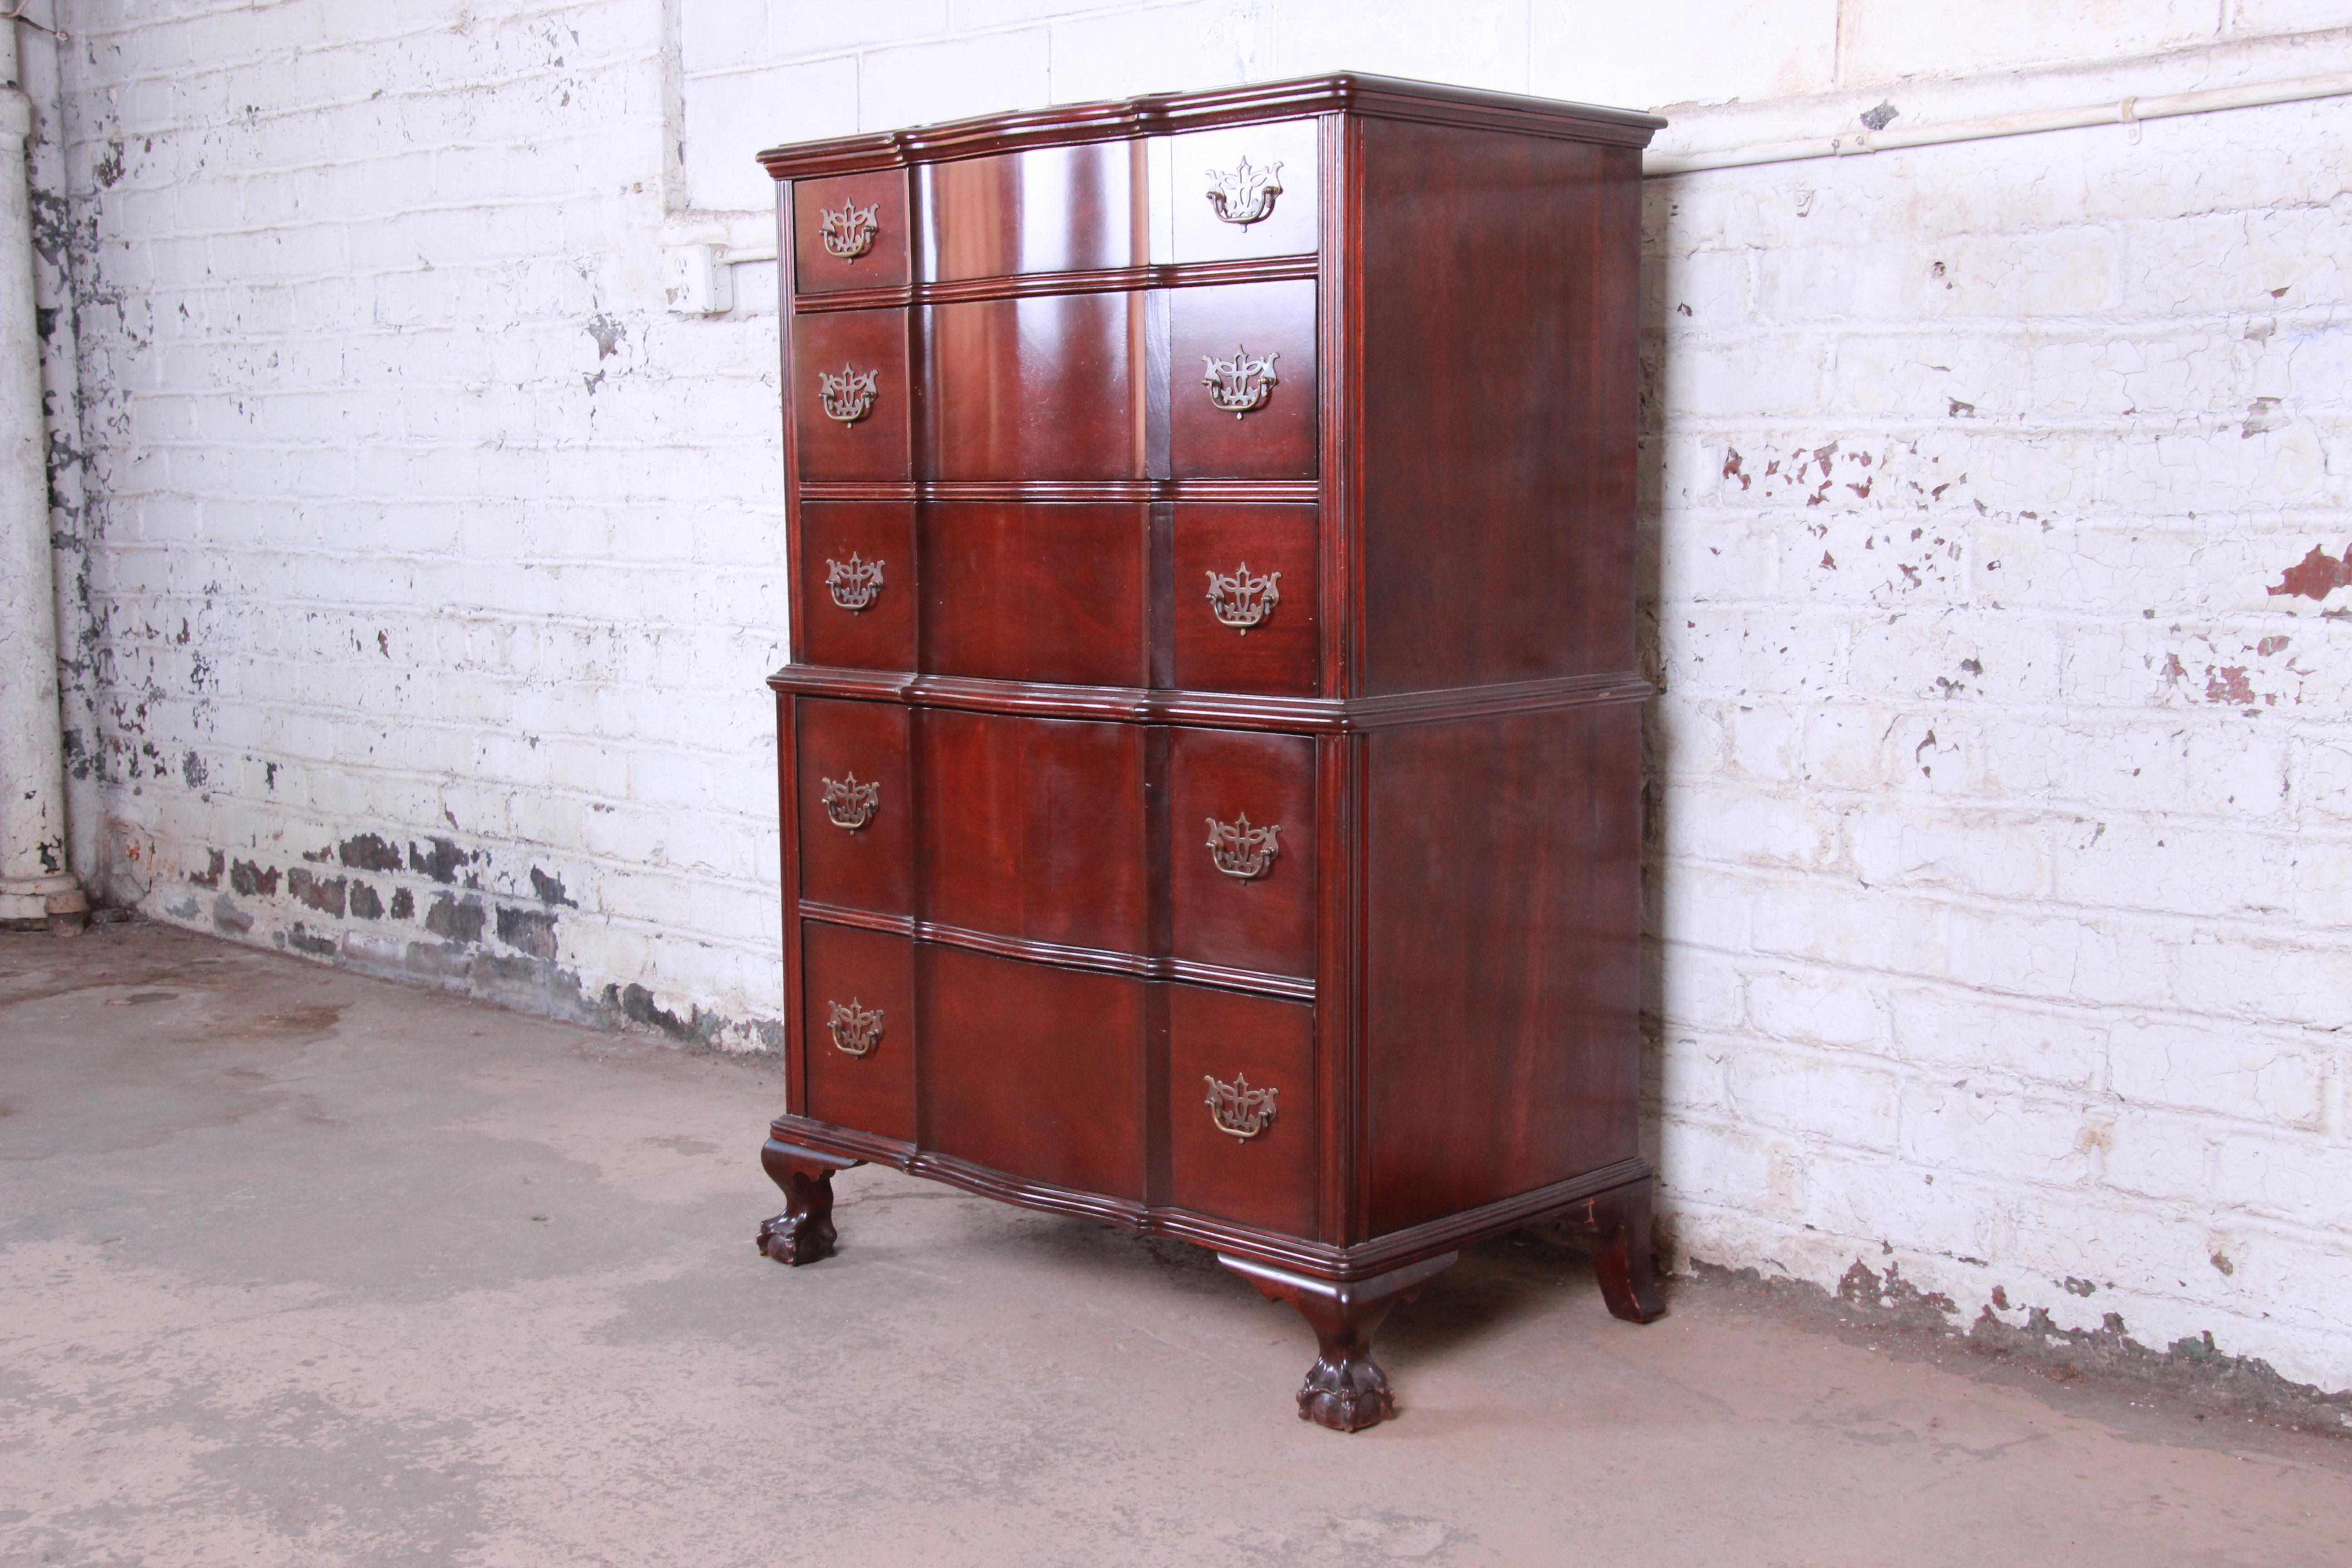 A beautiful solid mahogany Chippendale style highboy dresser by Kling Furniture of New York. The dresser features gorgeous mahogany wood grain and nice carved details, including ball and claw feet. It offers ample storage, with five deep dovetailed